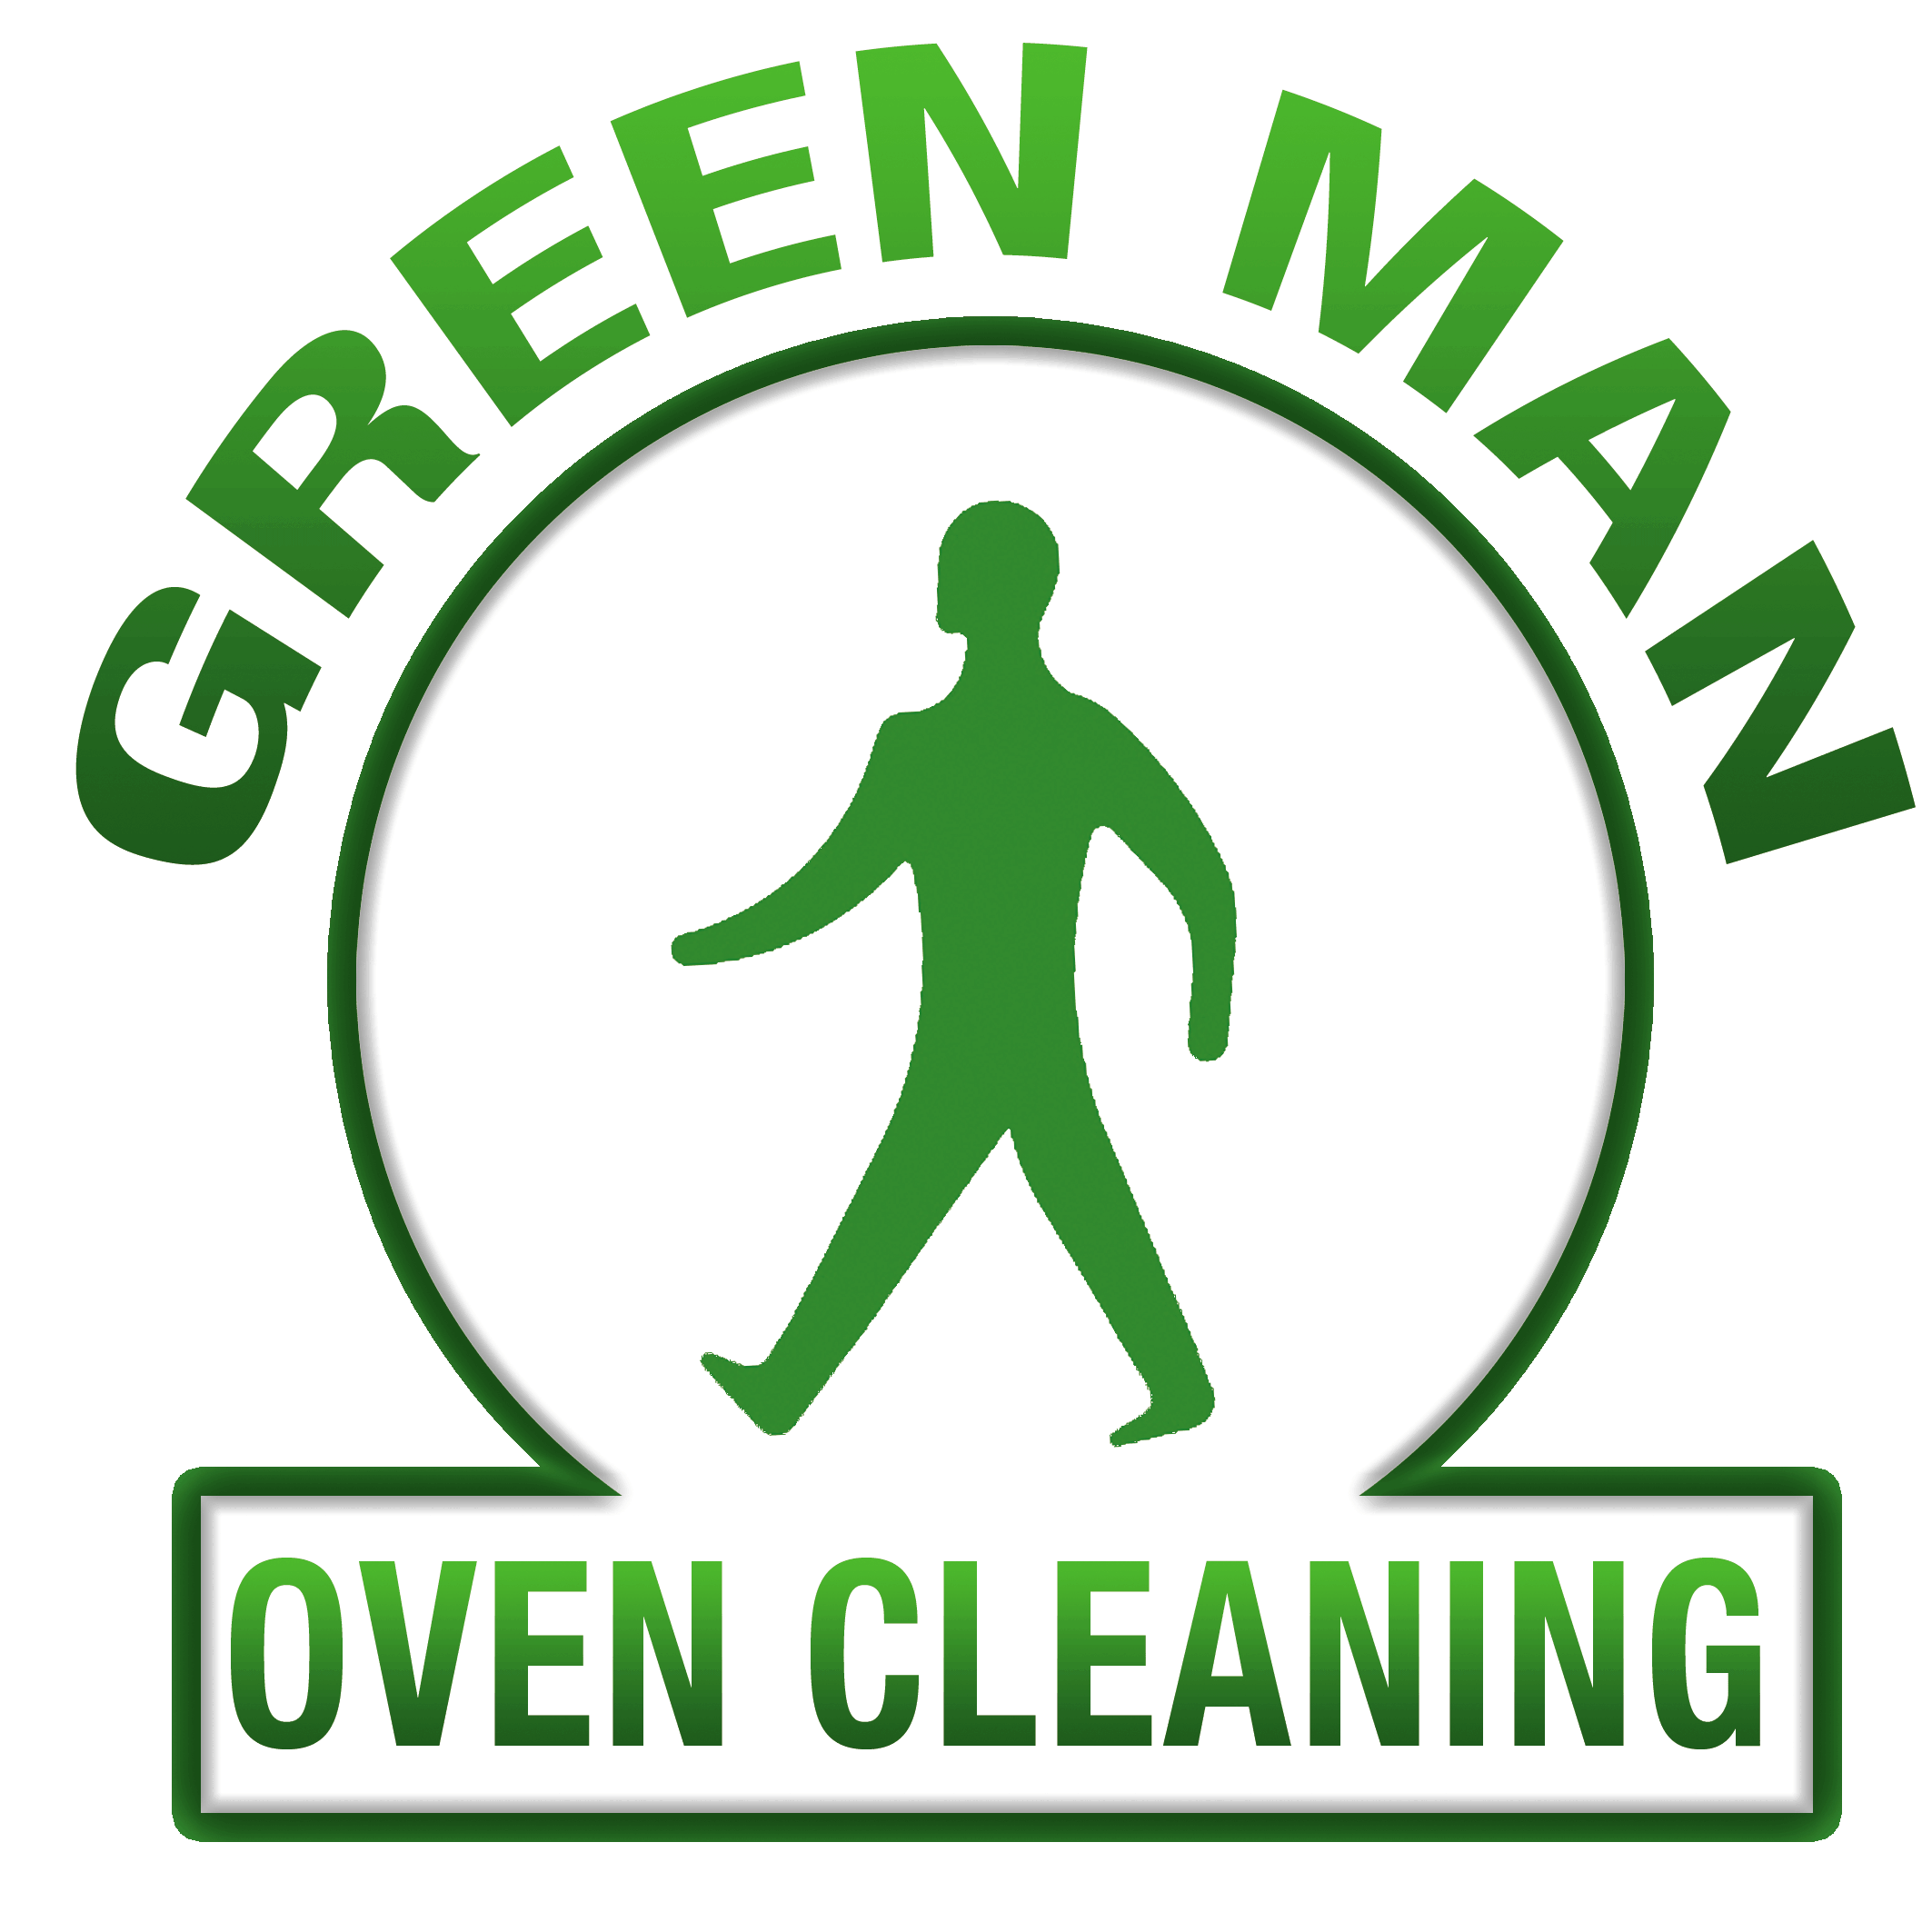 Green Man Logo - Green Man Oven Cleaning your oven, hob, microwave or BBQ